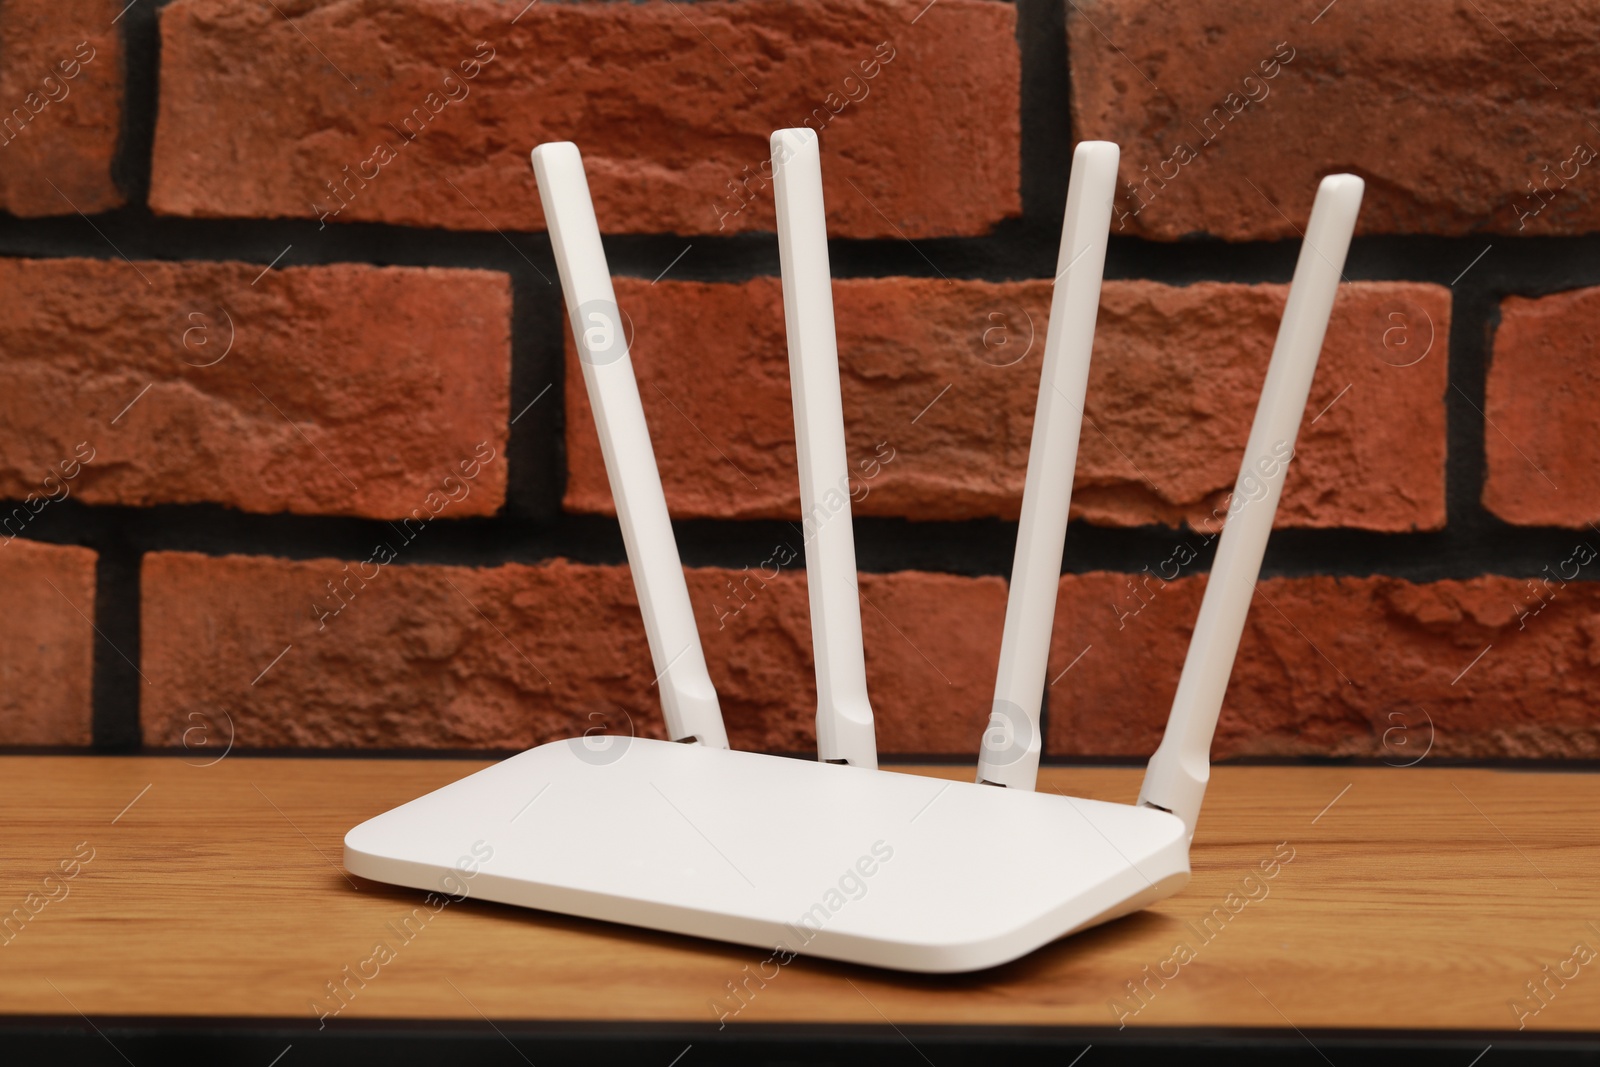 Photo of New white Wi-Fi router on wooden table near brick wall